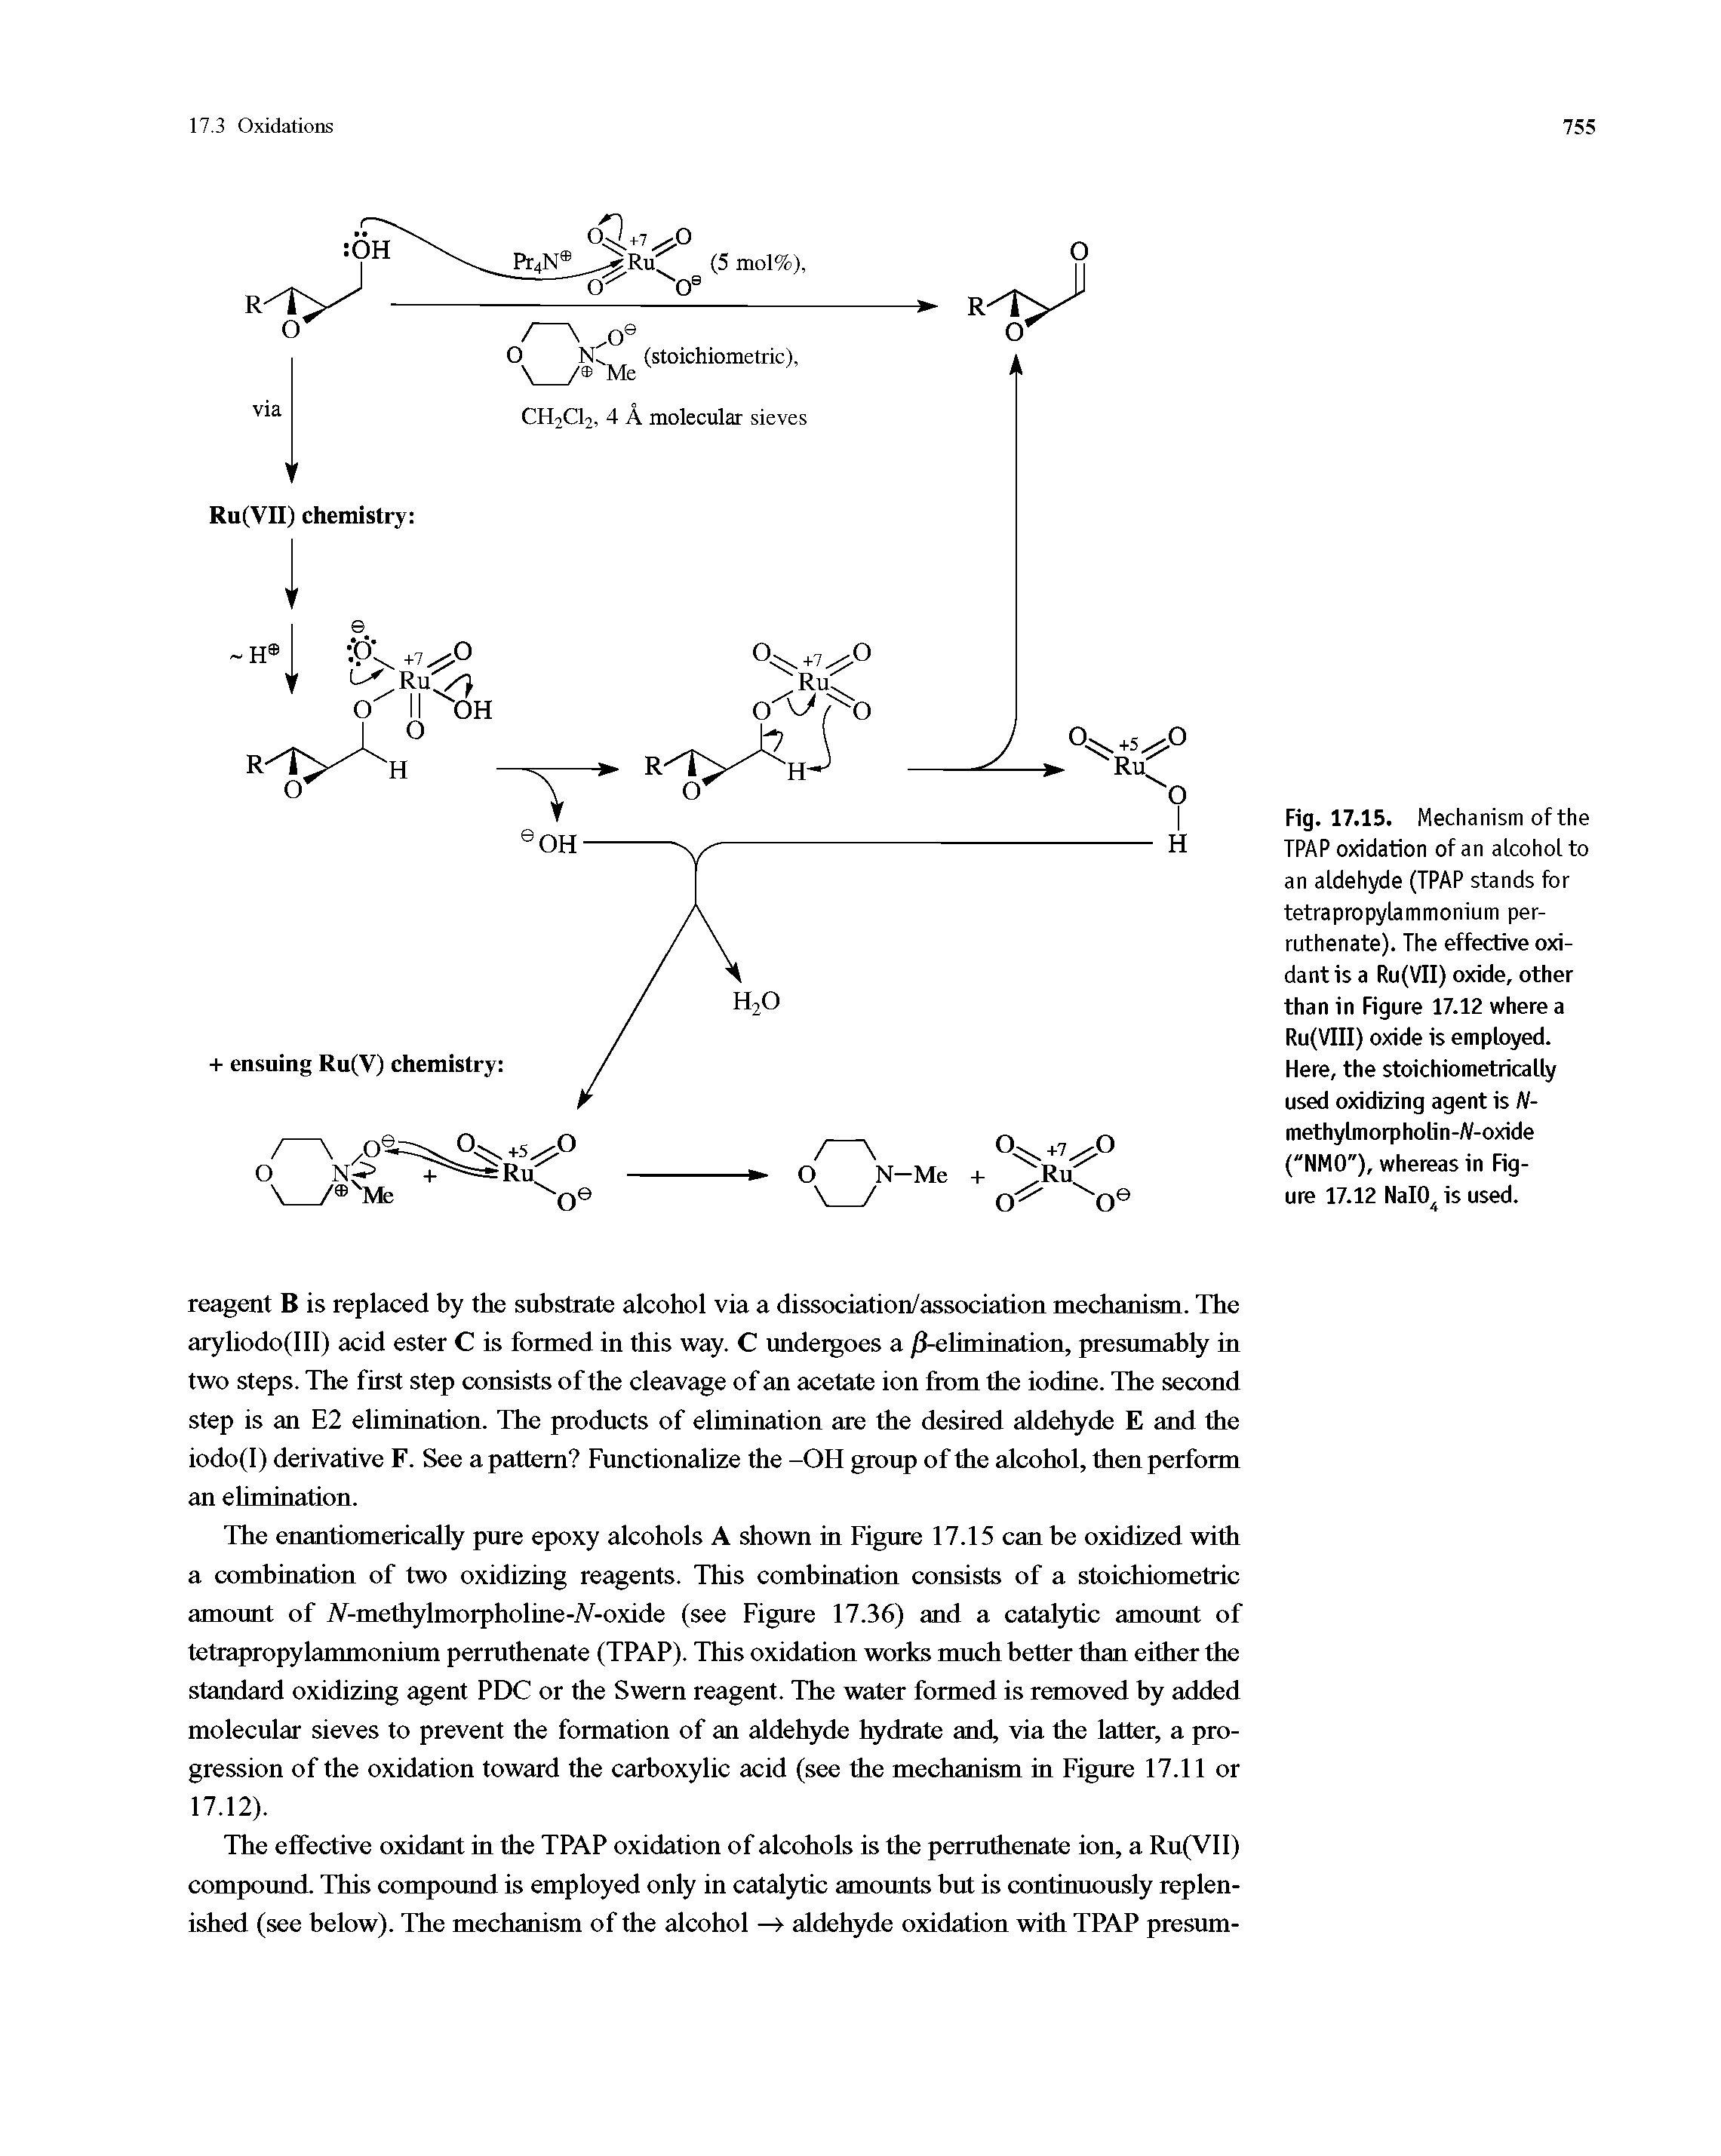 Fig. 17.15. Mechanism of the TPAP oxidation of an atcohot to an aldehyde (TPAP stands for tetrapropylammonium per-ruthenate). The effective oxidant is a Ru(VII) oxide, other than in Figure 17.12 where a Ru(VIII) oxide is employed. Here, the stoichiometrically used oxidizing agent is N-methylmorpholin-/V-oxide ("NMO"), whereas in Figure 17.12 NaI04 is used.